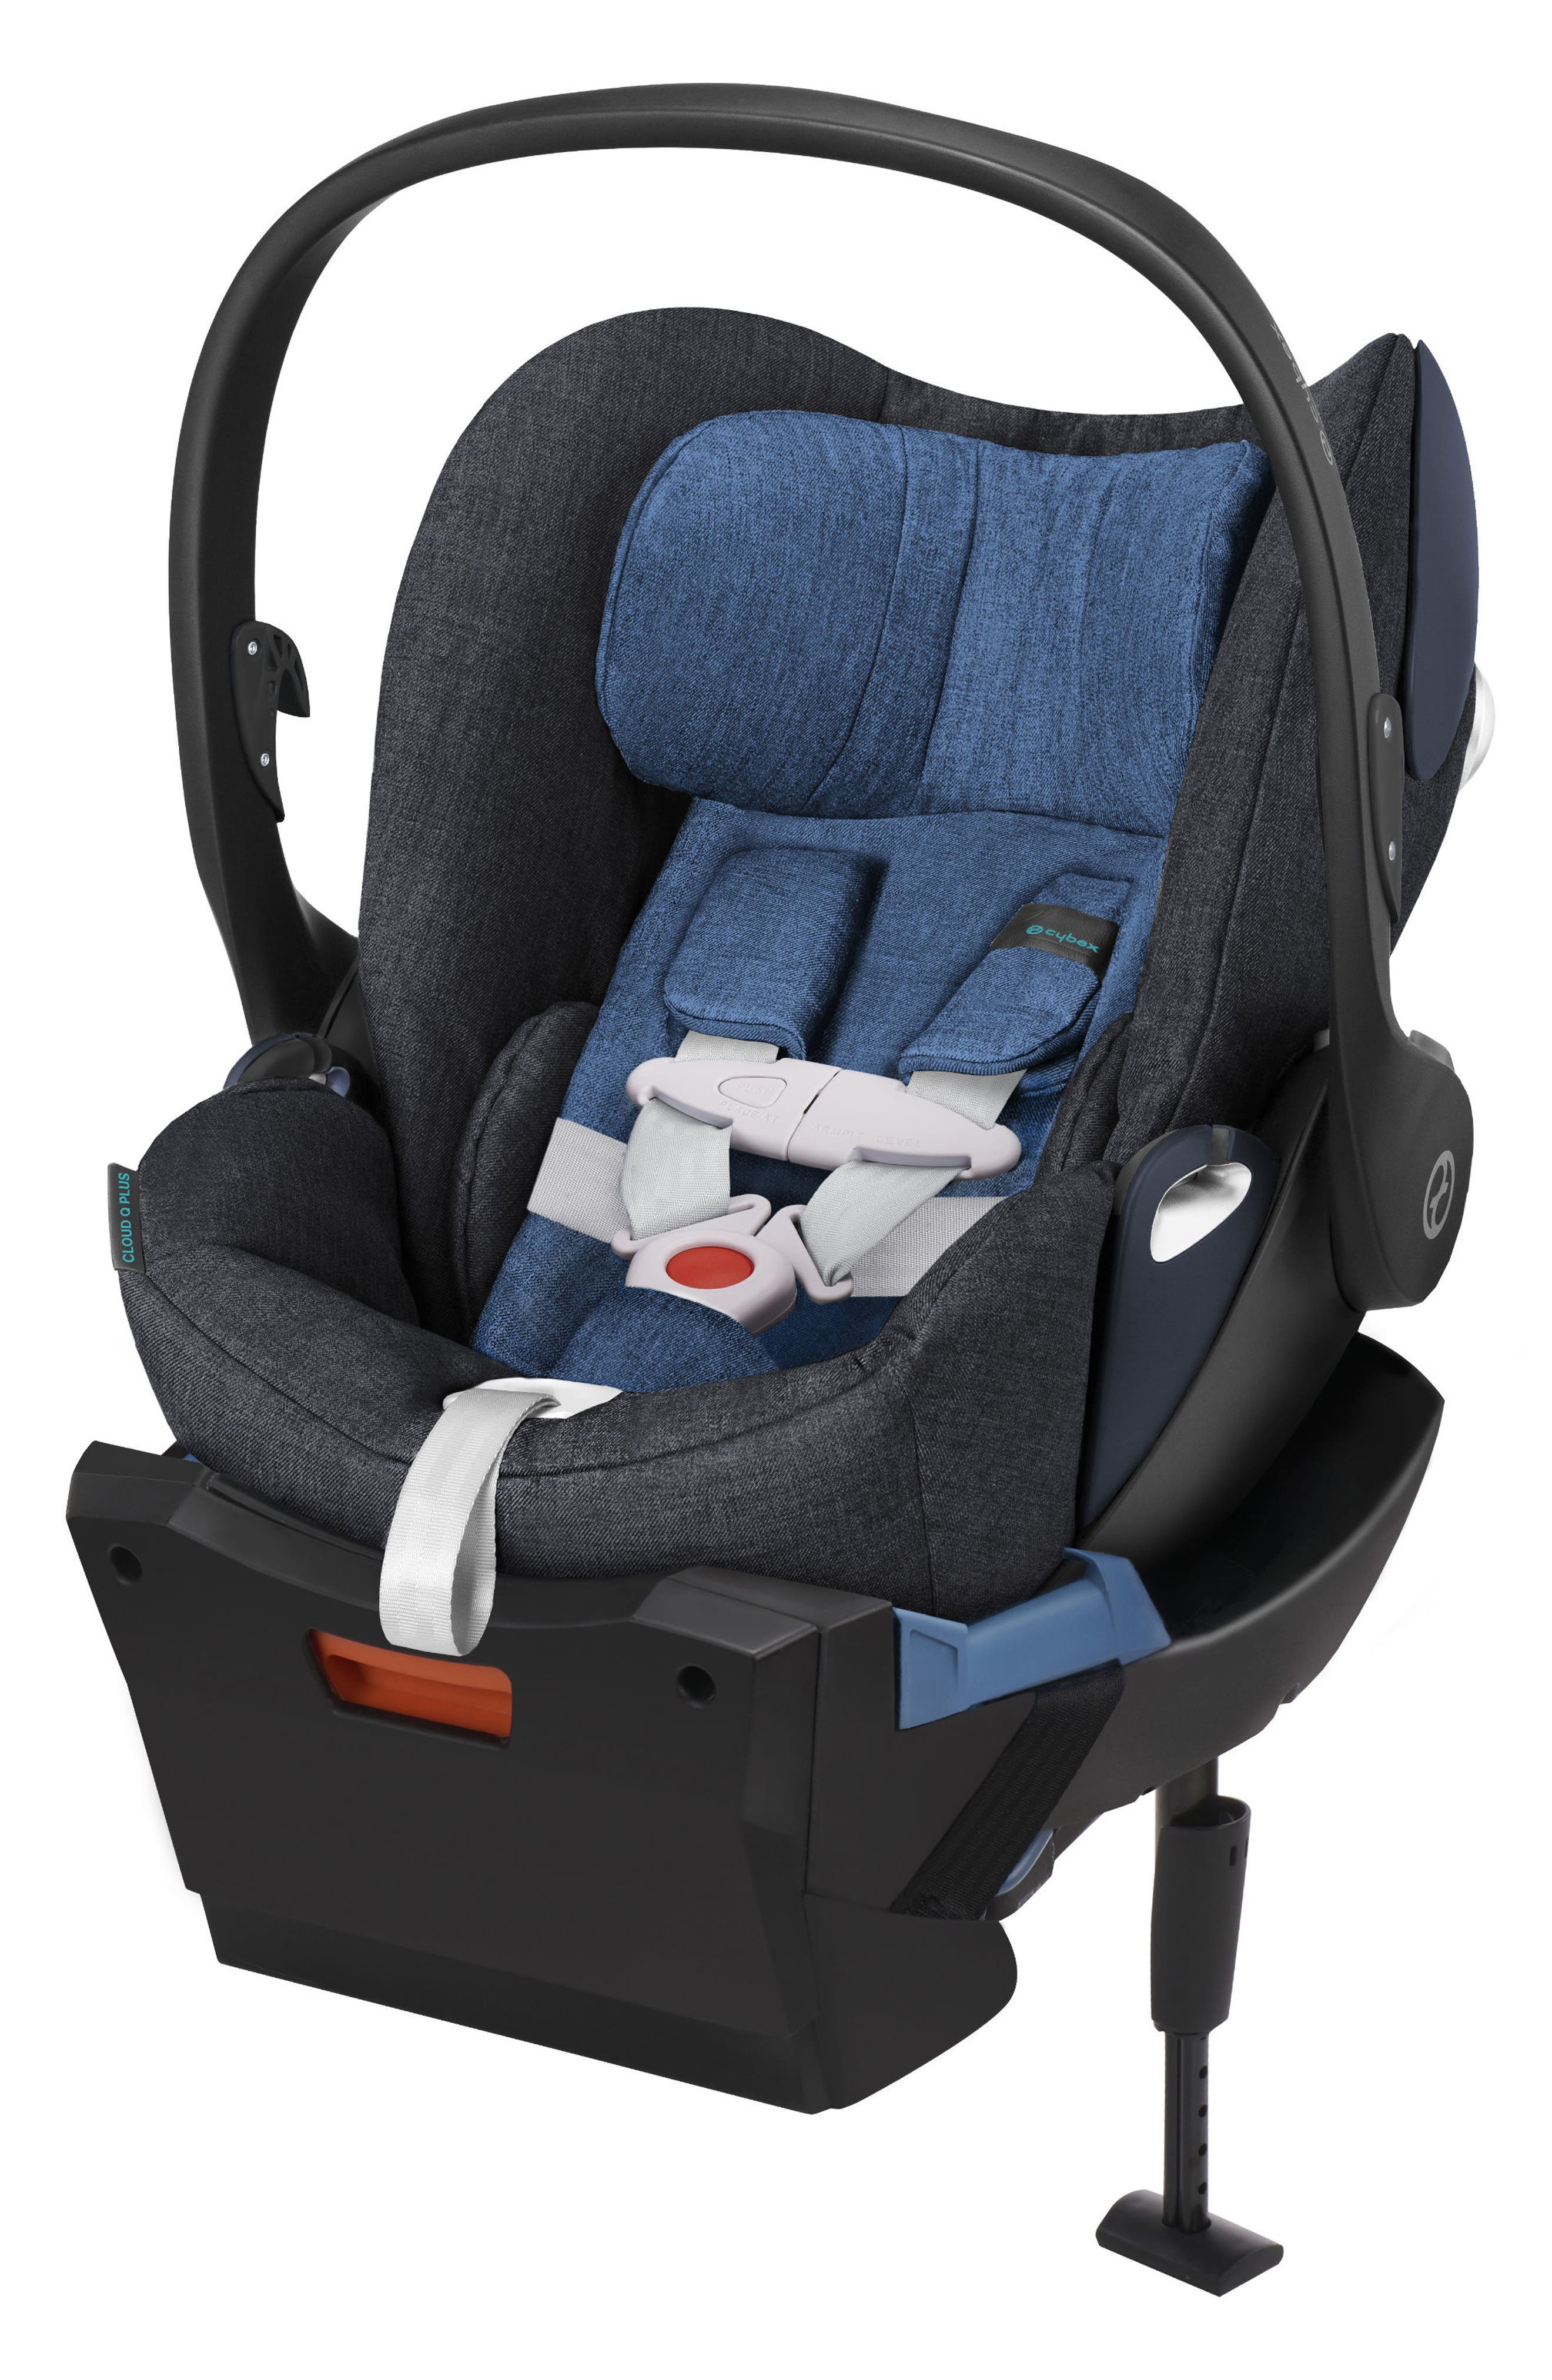 Louis Vuitton Baby Car Seat Covers - Velcromag